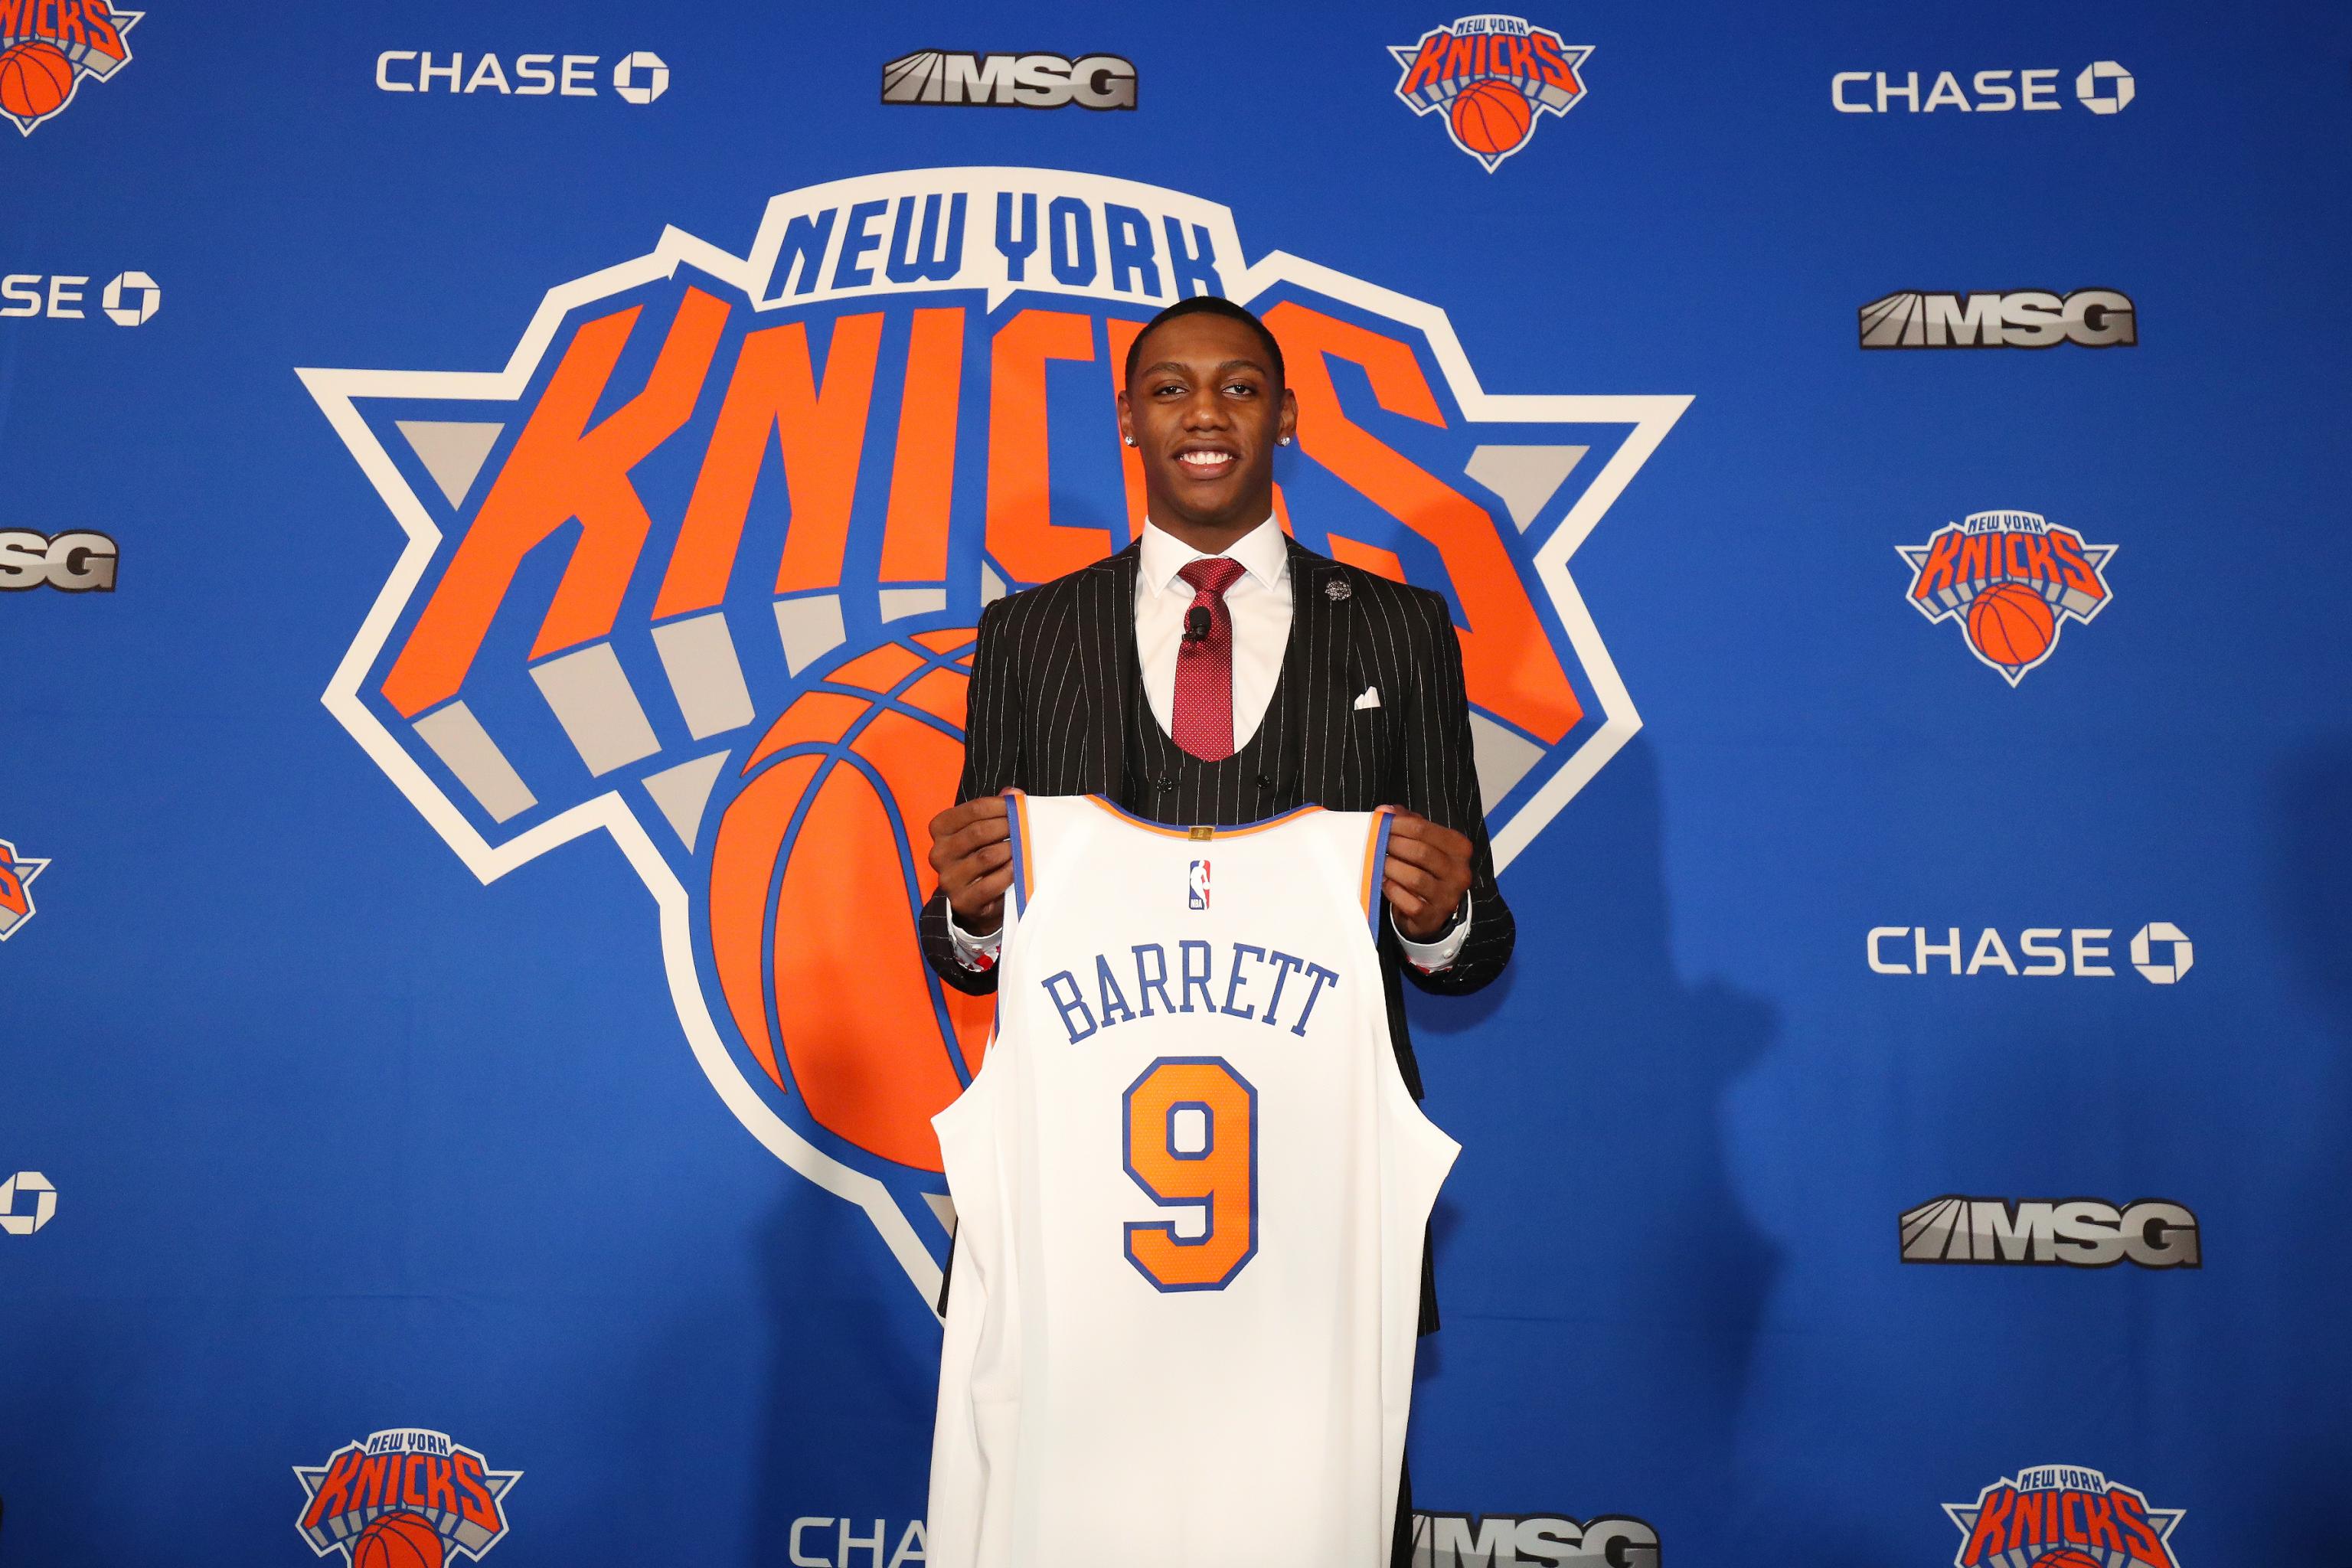 Video: Watch RJ Barrett's Special Introduction to Knicks' Madison